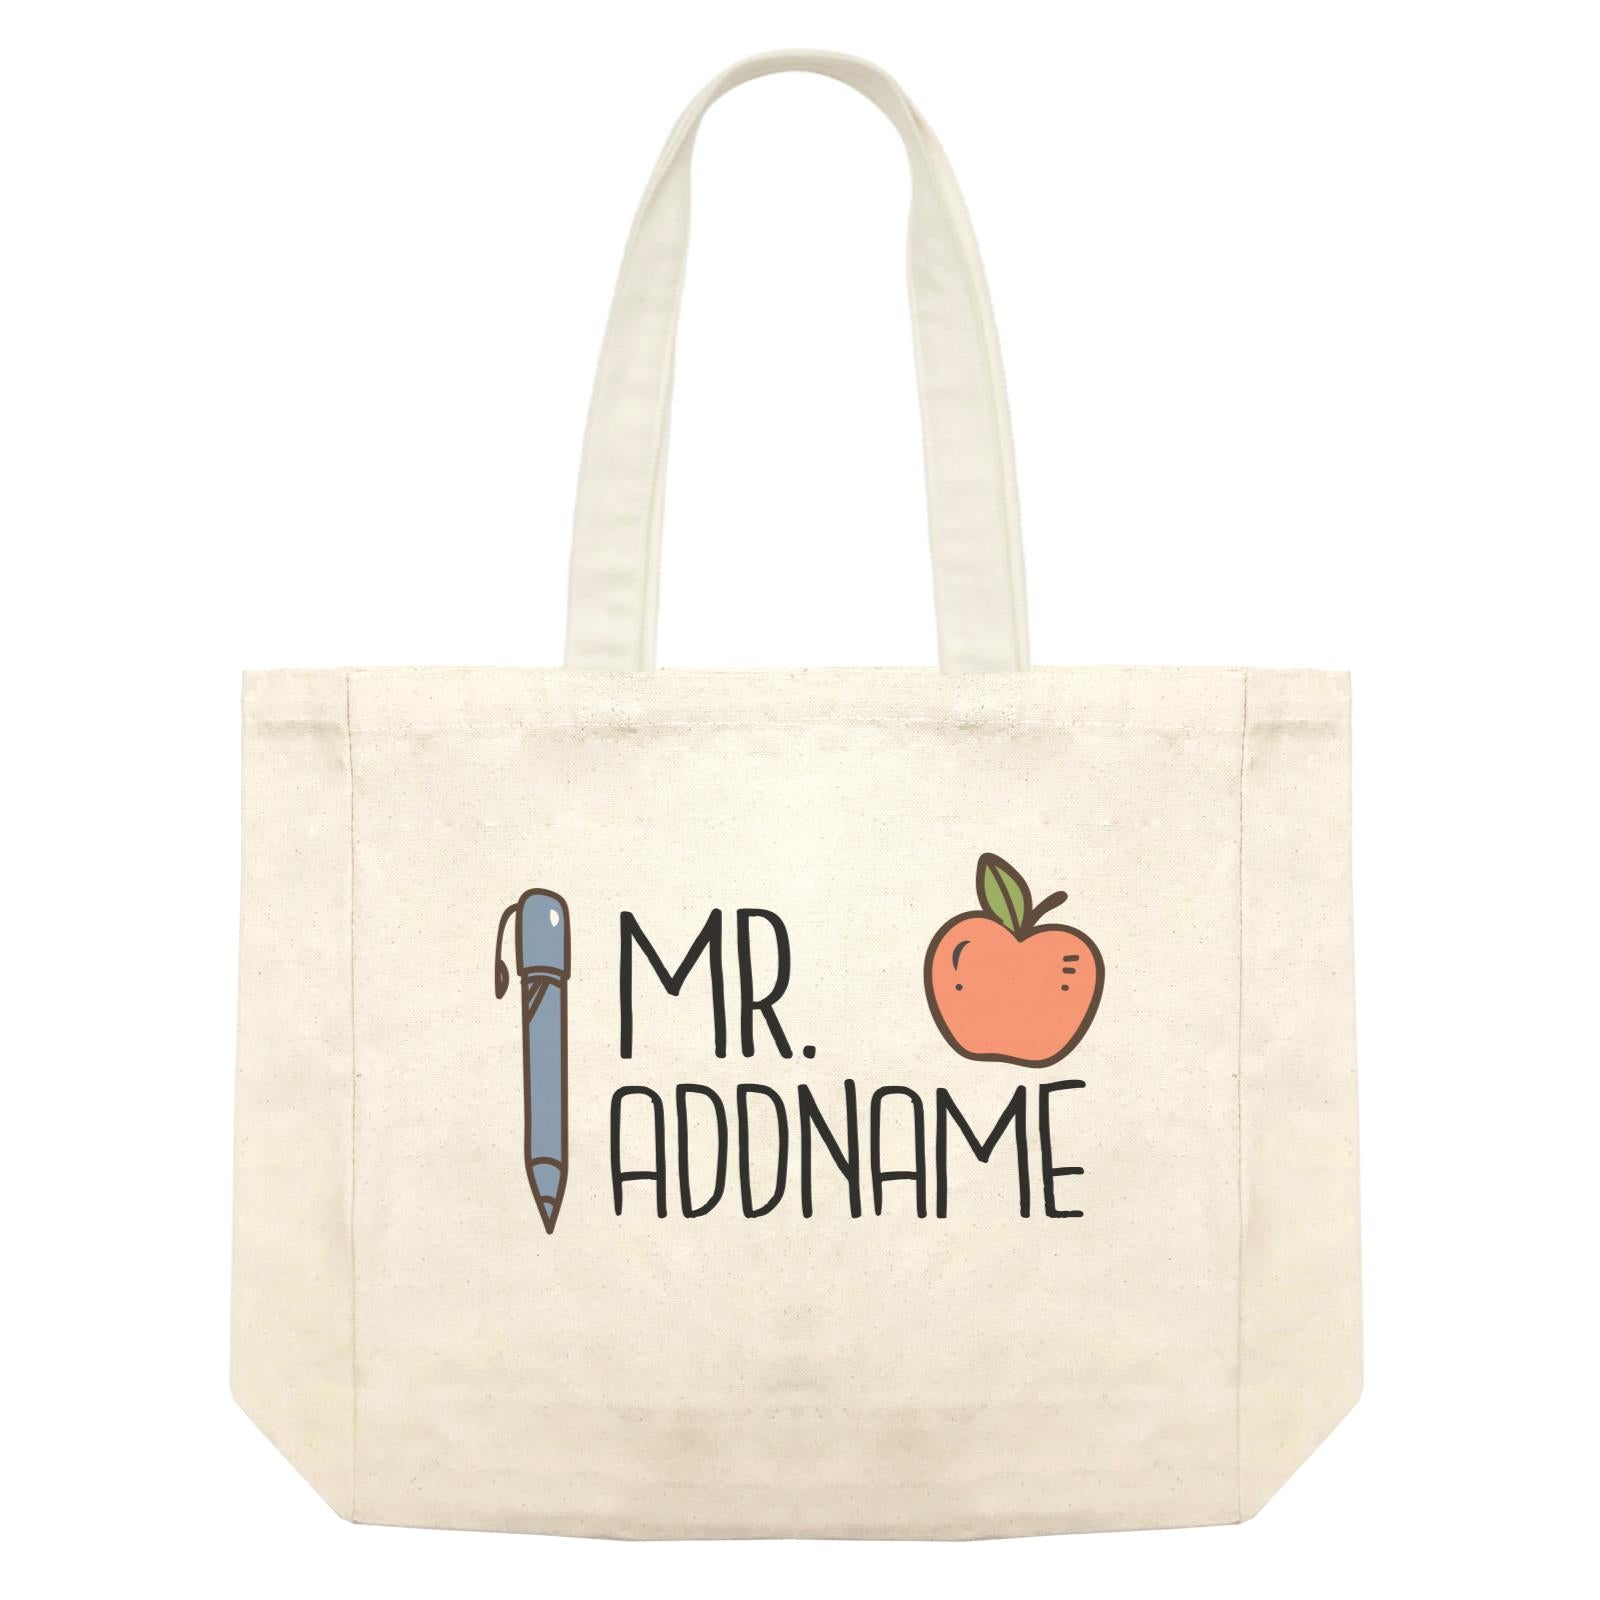 Teacher Addname Apple And Pen Mr Addname Shopping Bag